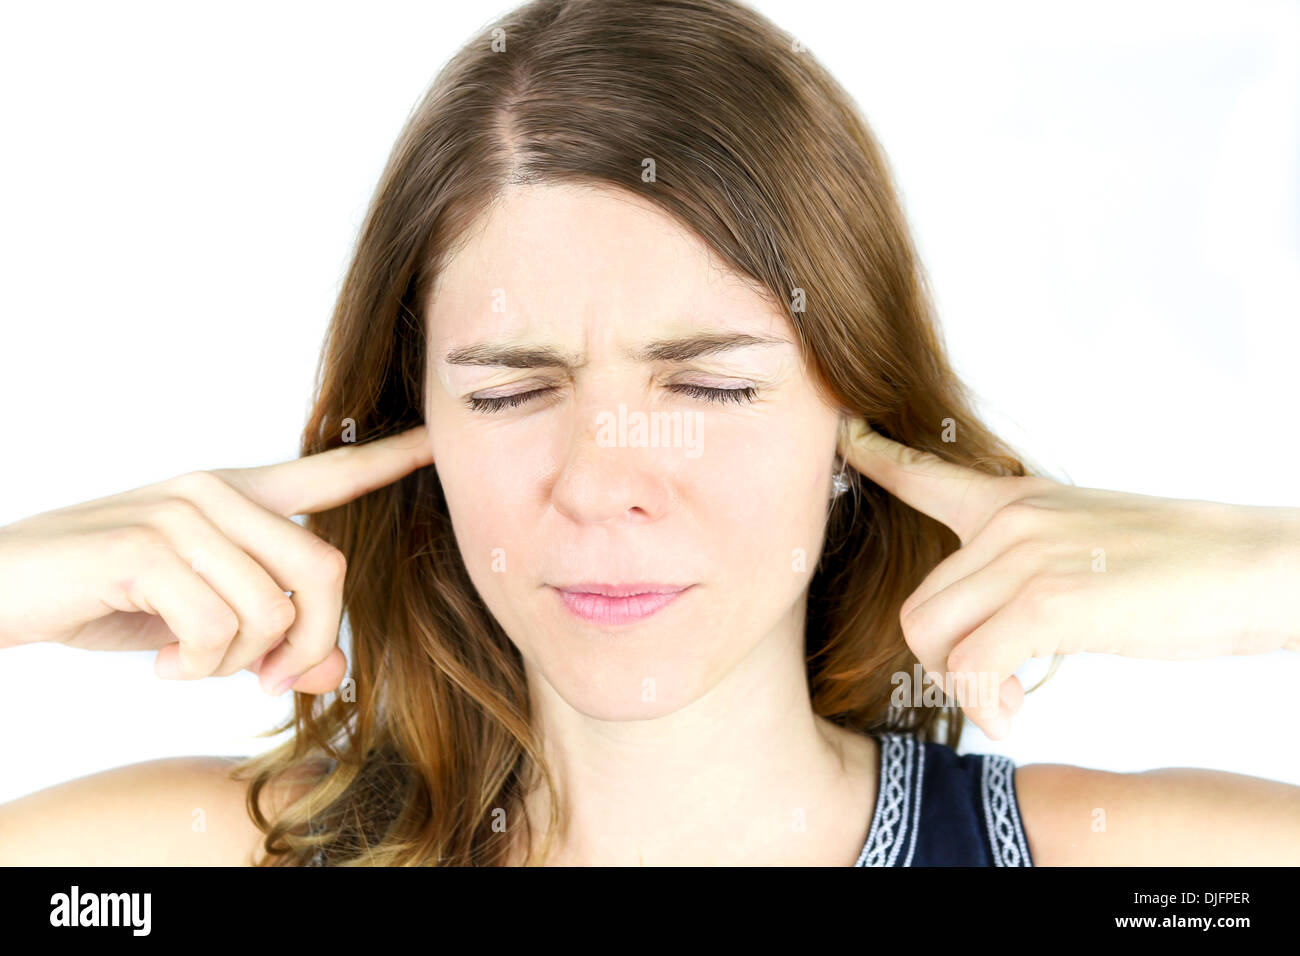 A young woman holds her hands over her ears to block out irritating sounds. Stock Photo